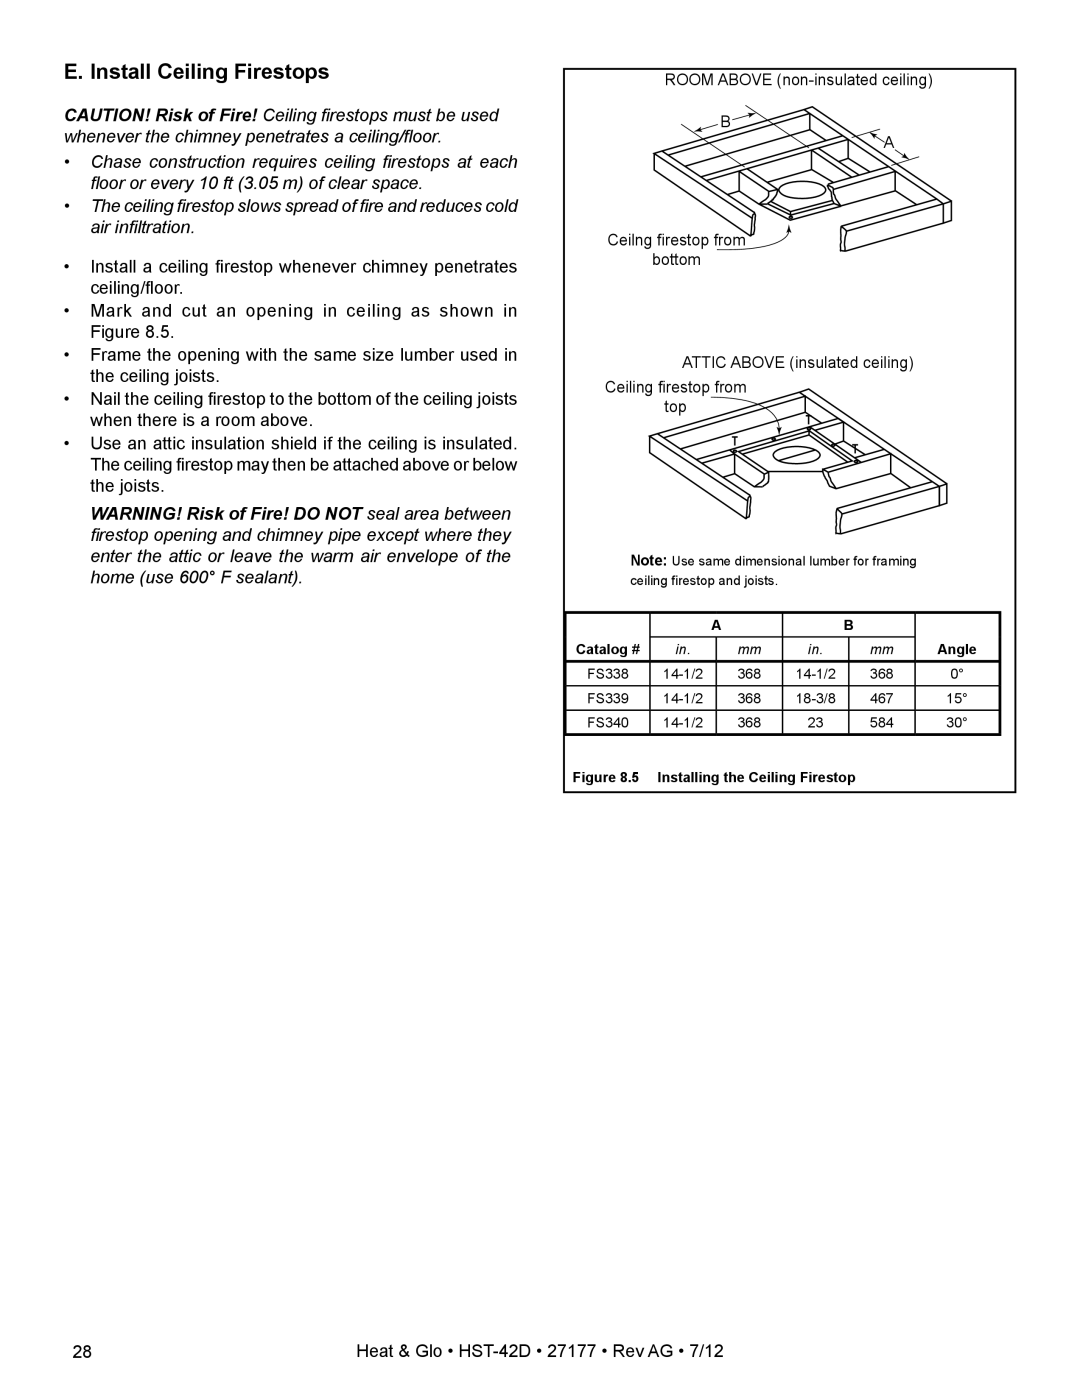 Heat & Glo LifeStyle HST-42D owner manual E. Install Ceiling Firestops 